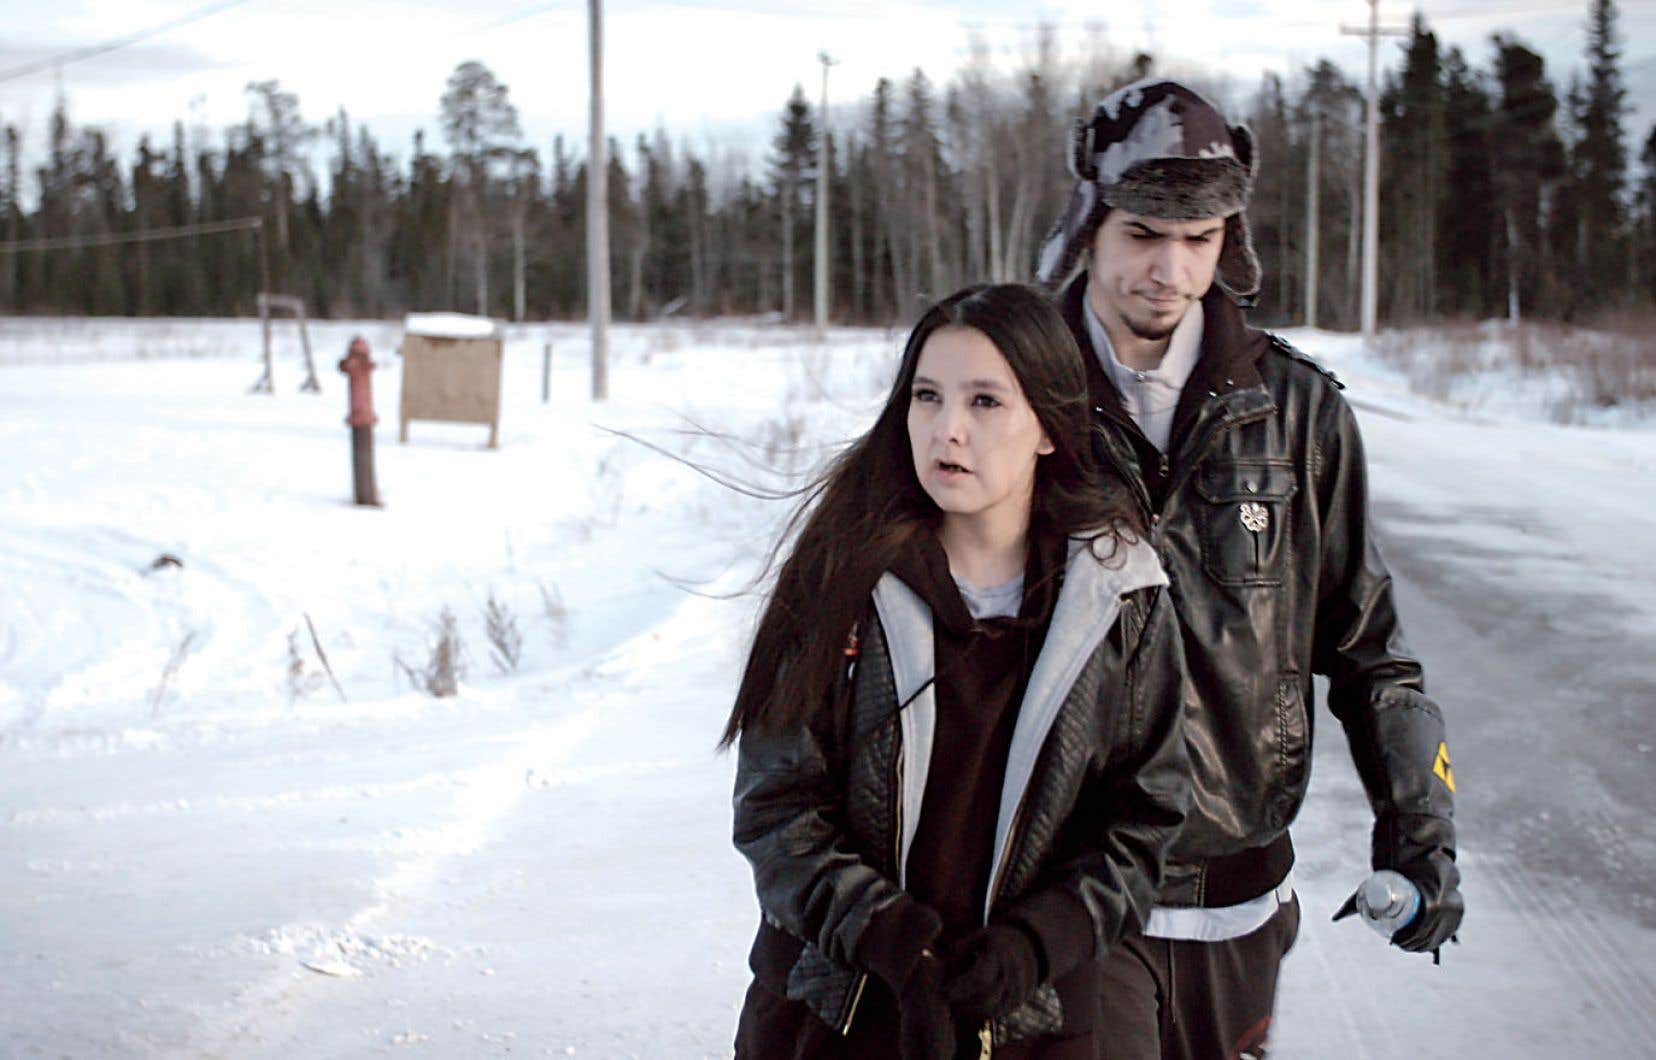 Still from Indictment: The Crimes of Shelly Chartier. Shelly Chartier and her husband Rob Marku walk down a snowy rural road with tense looks on their faces. Shelly is looking away from the camera to her left and Rob is looking downwards.